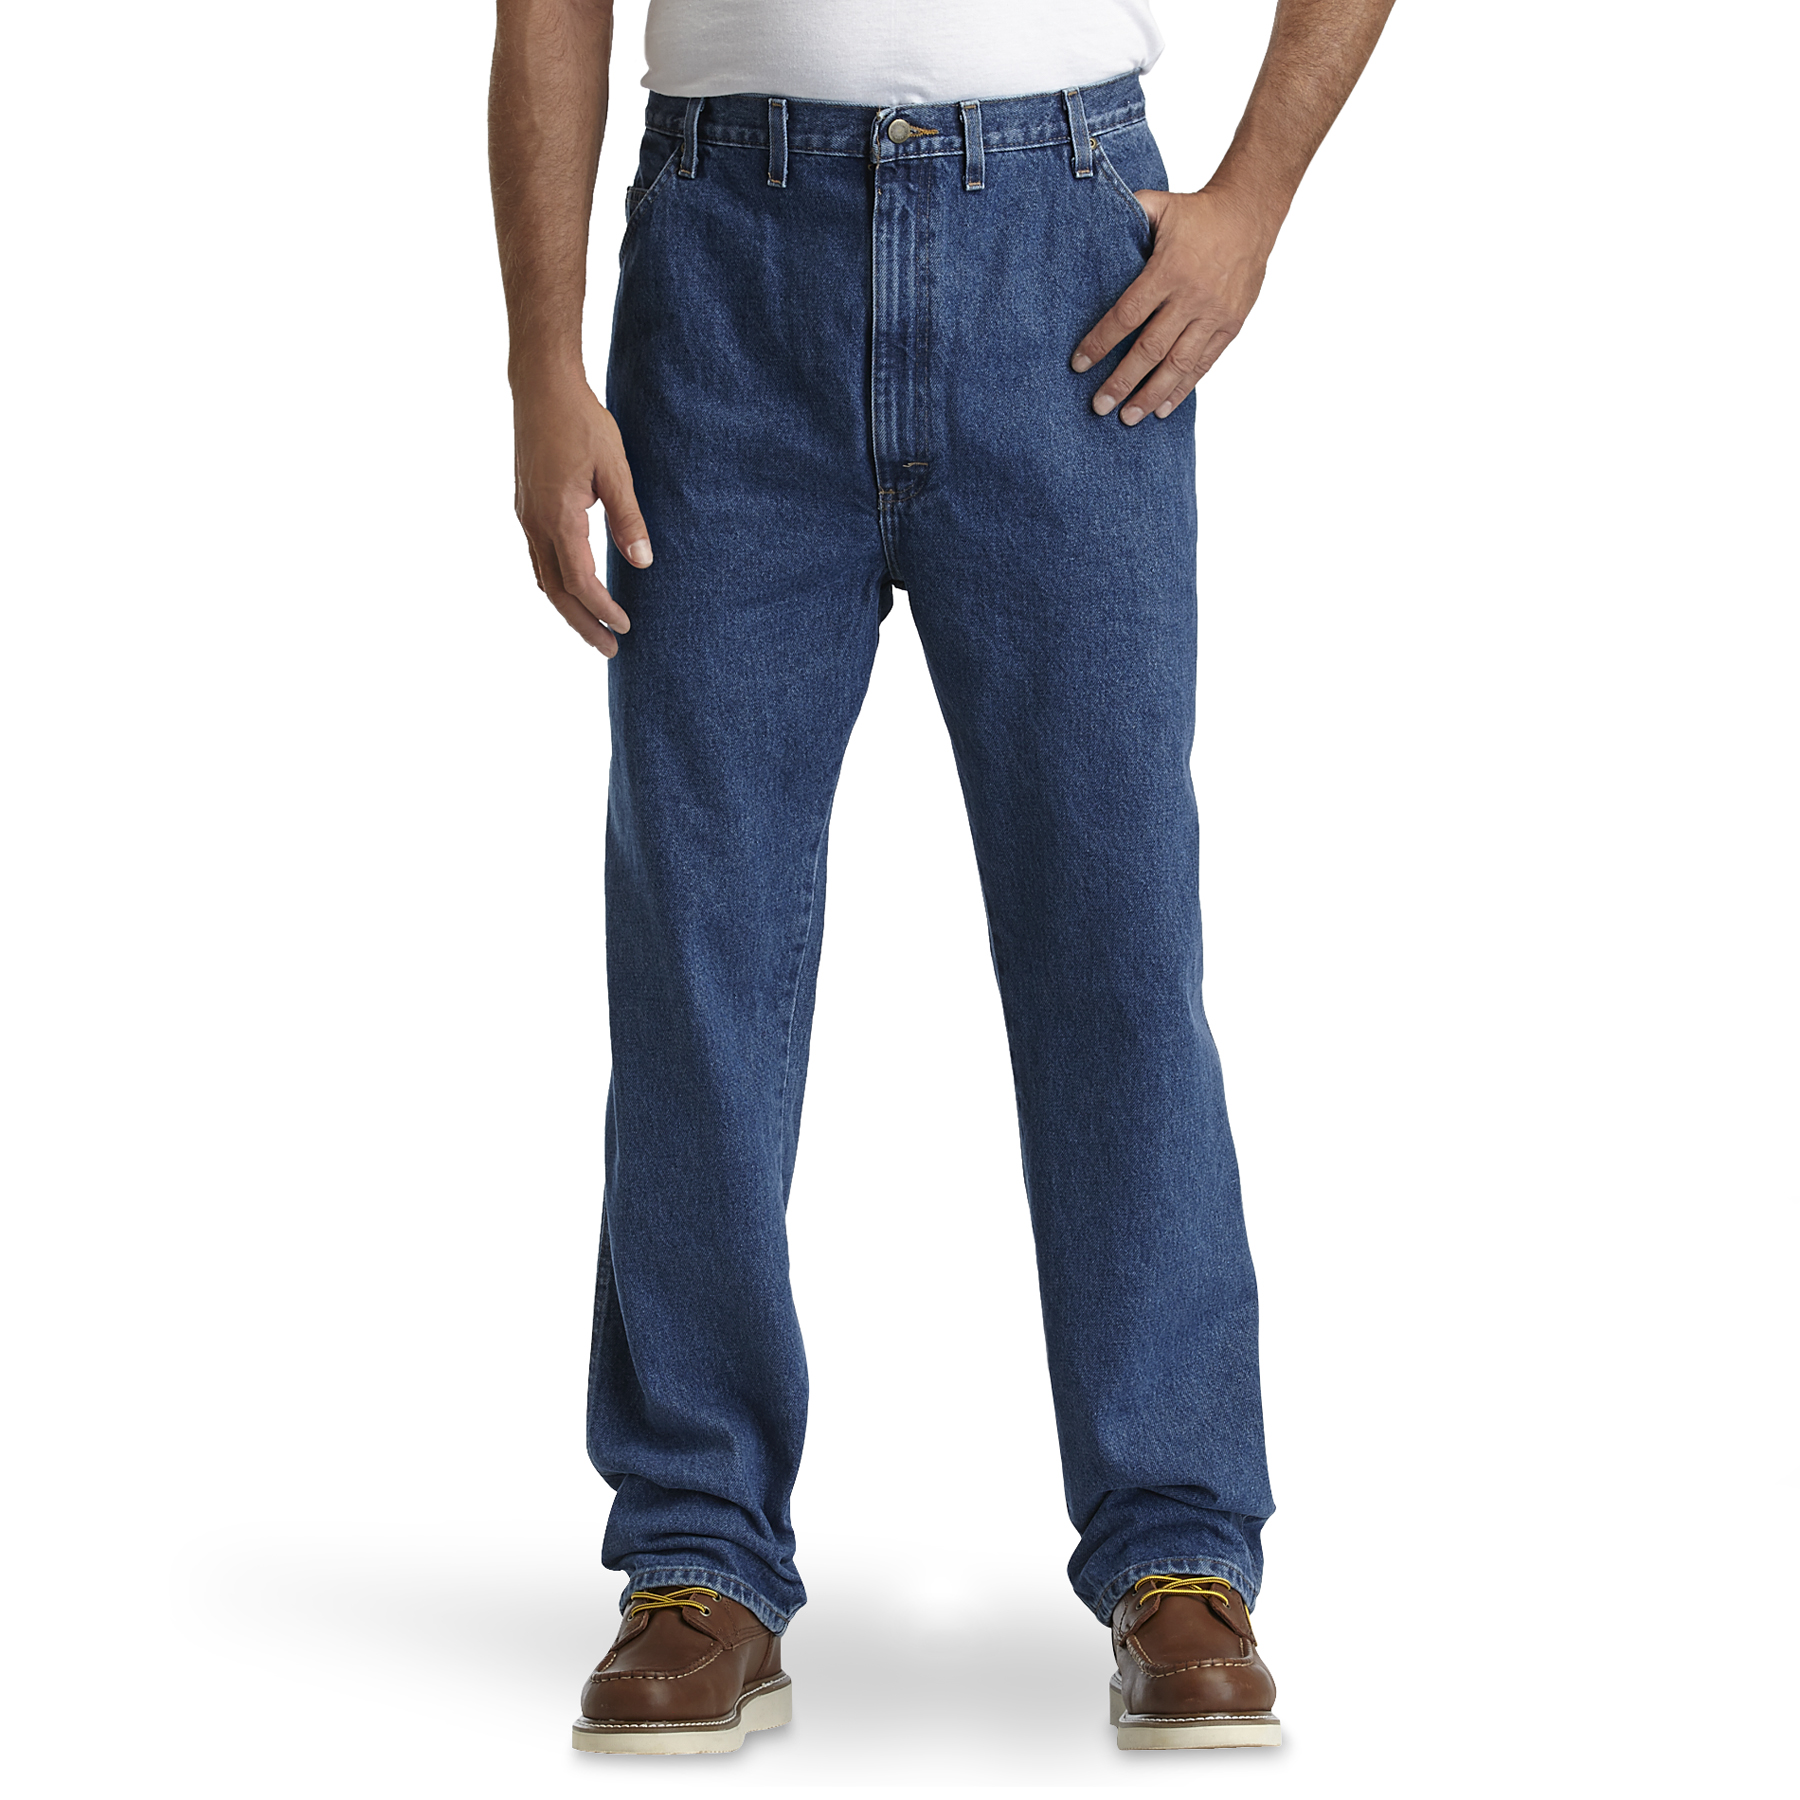 I'm looking to order men Wrangler jeans with a tag number of 85900dw ...